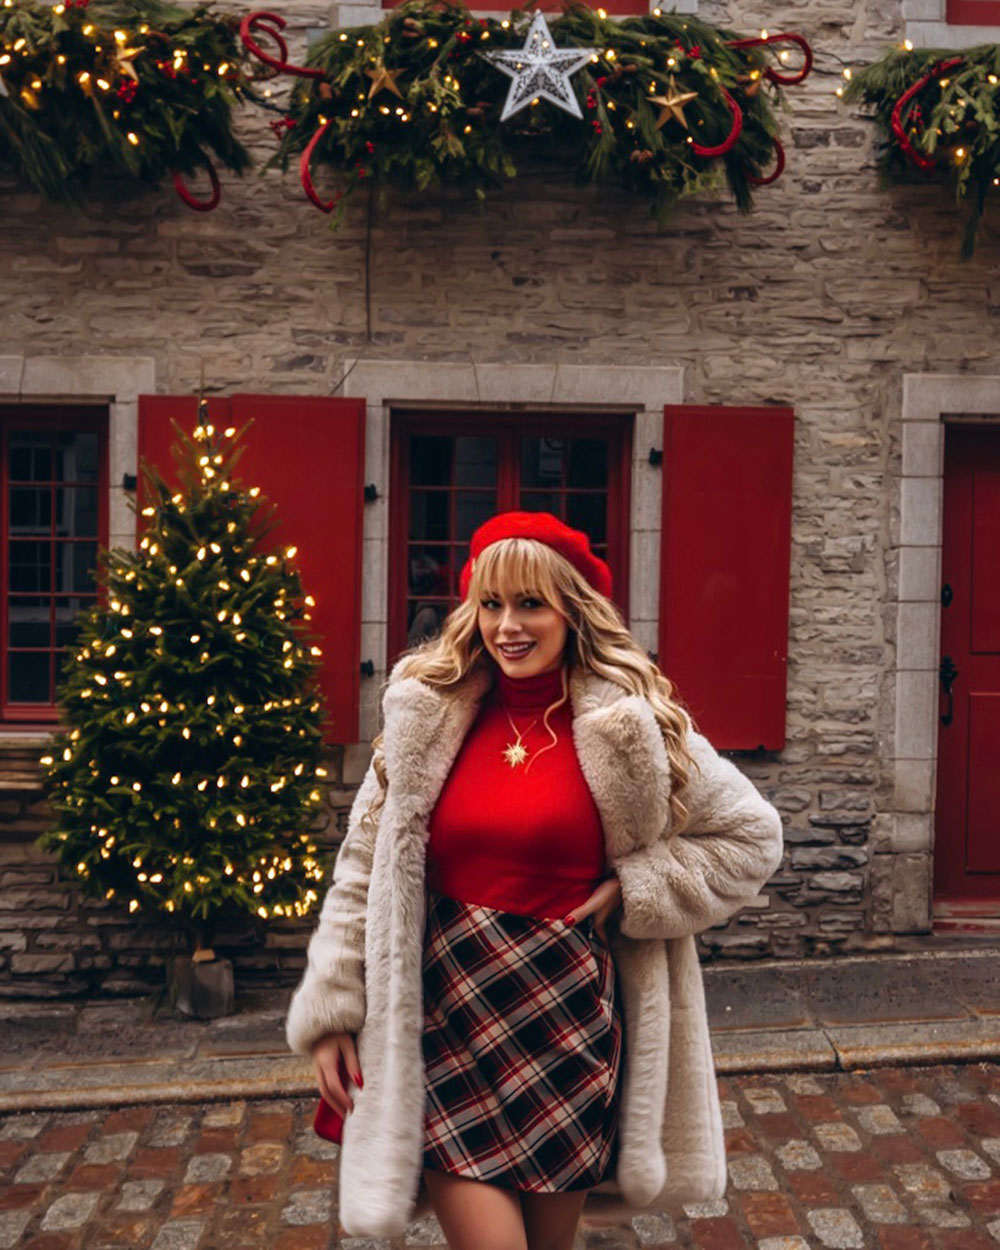 Quebec City at Christmas time is absolutely magical. In fact, it’s pretty safe to say it’s the most magical place to visit at Christmas time in all of Canada! If you’re planning a trip to Quebec City this winter you won’t want to miss this guide to the best things to do in Quebec City at Christmas time. This guide features everything from the top Quebec City activities and attractions, to the must see sights, best restaurants, festive events, and everything in between. Pictured here: Explore Old Quebec